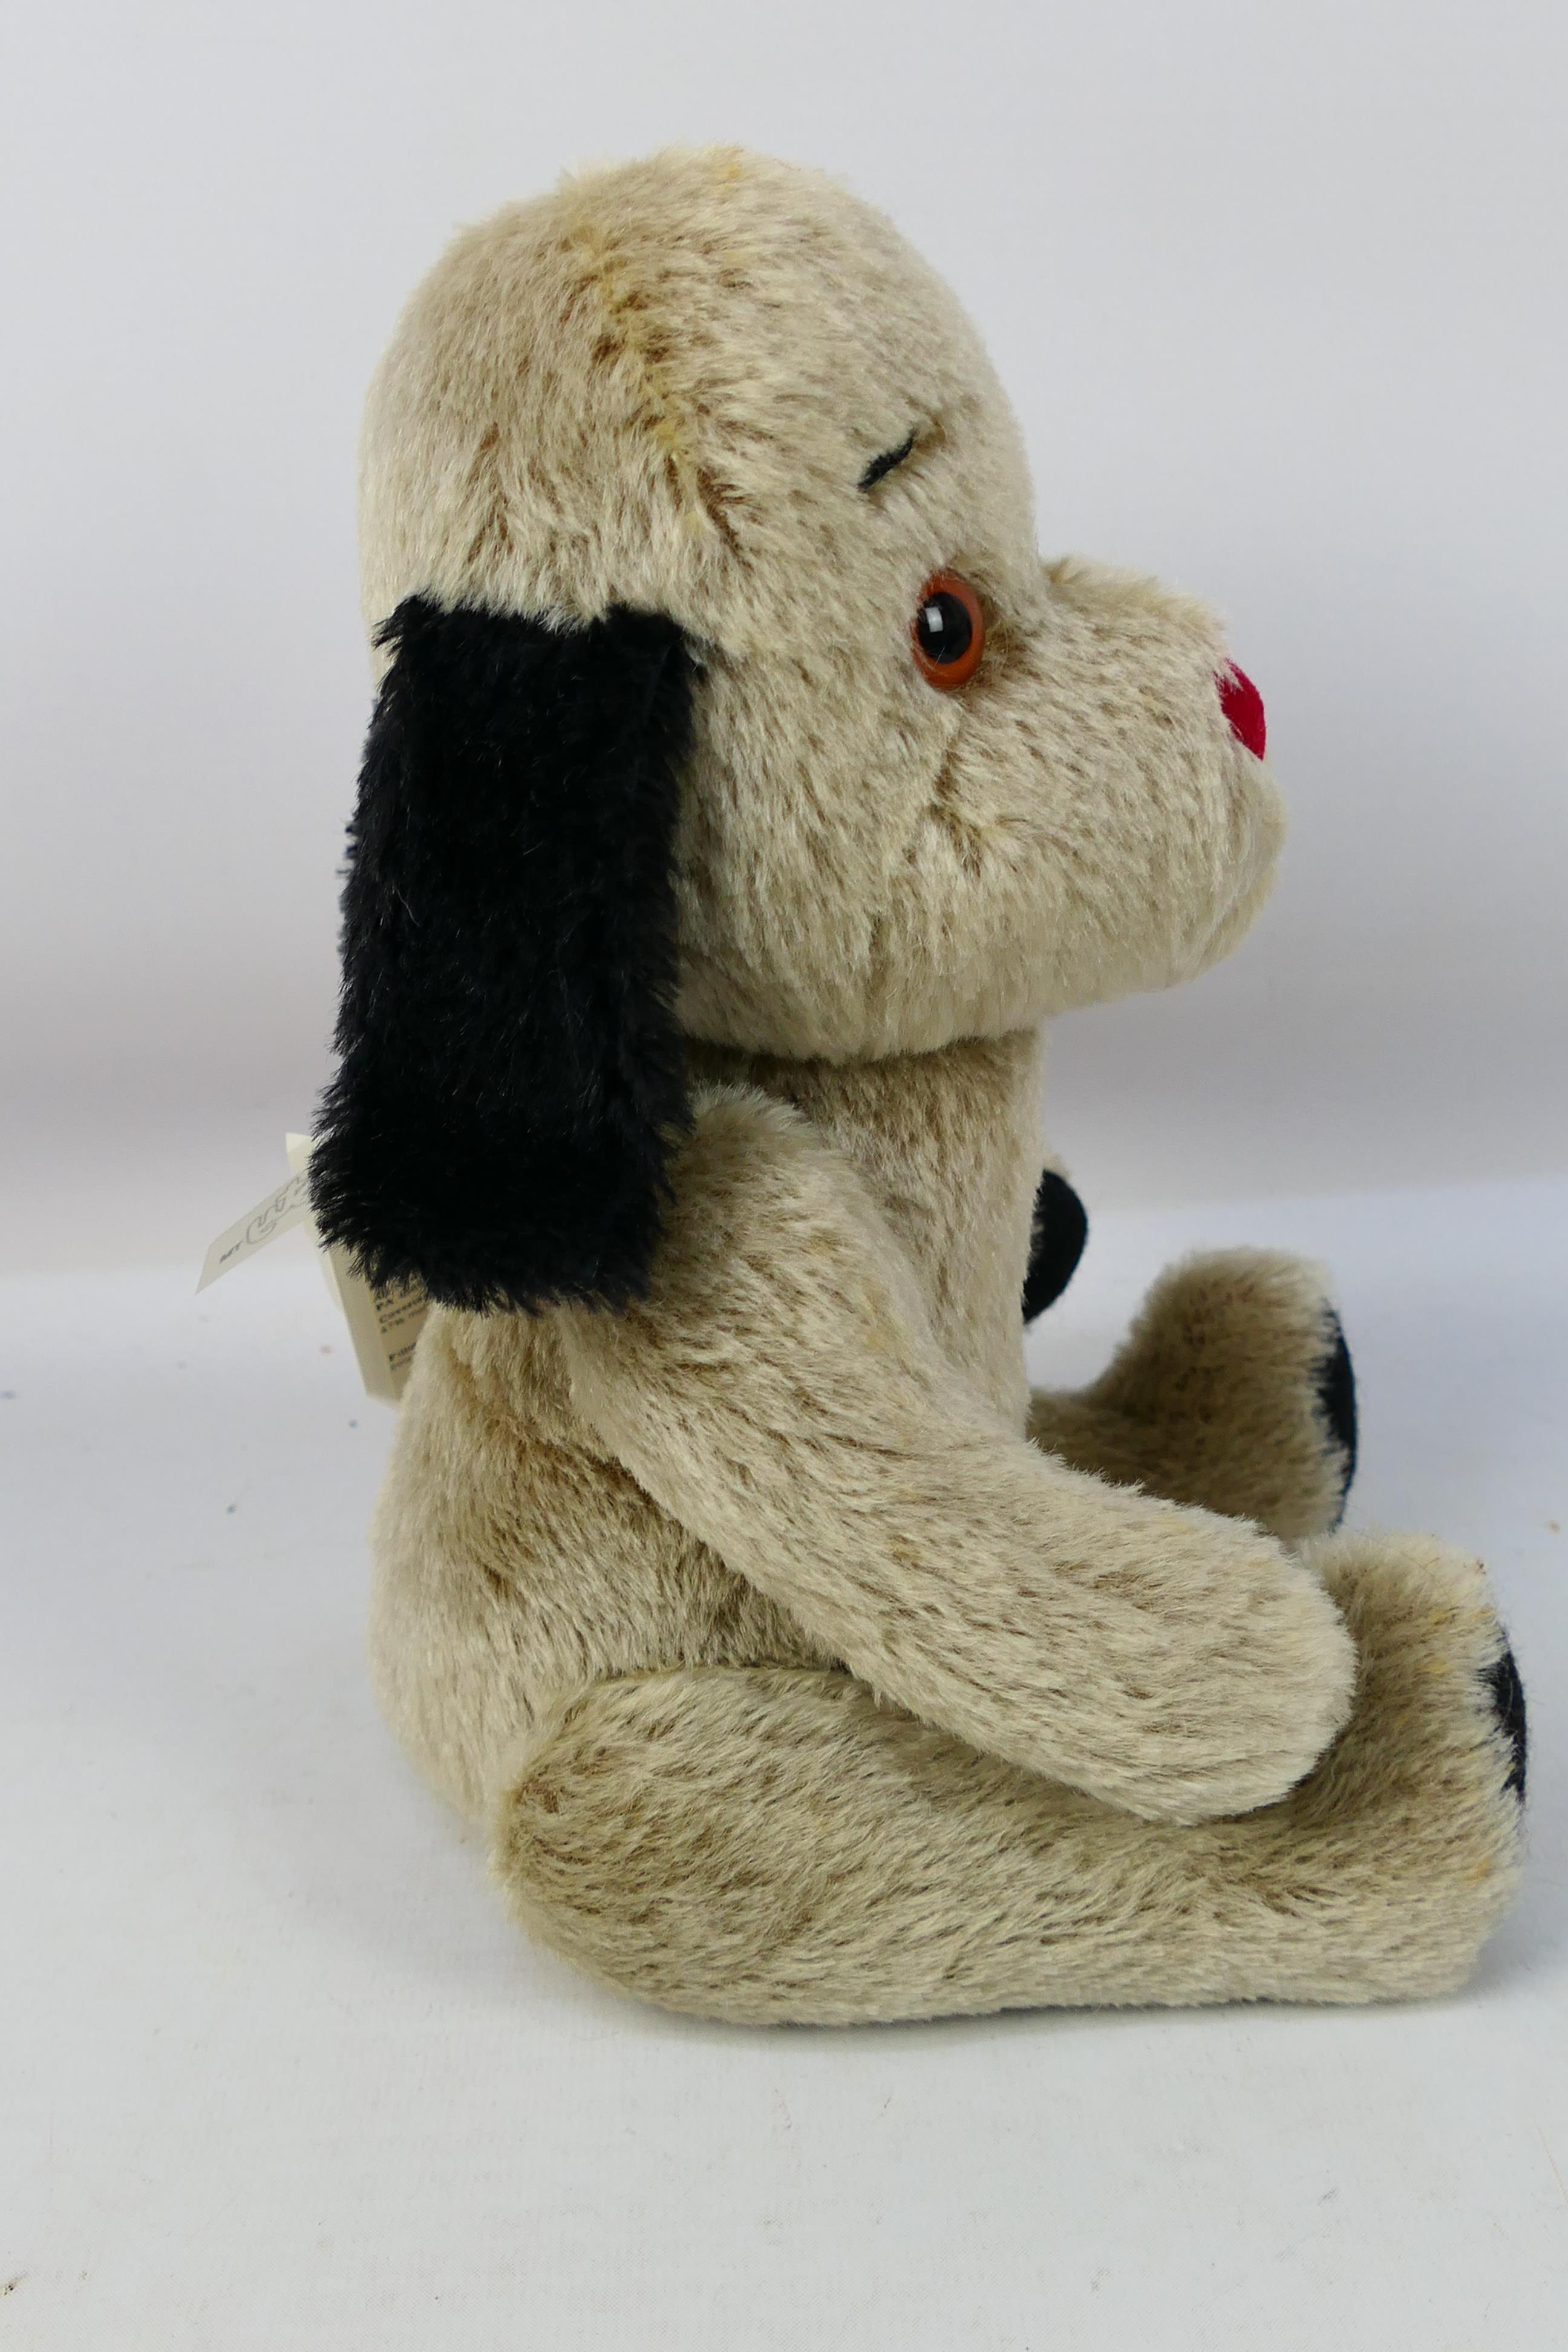 Steiff - Sooty Show - Plush - A Sweep Plush (#664410) from The Sooty Show, - Image 8 of 8